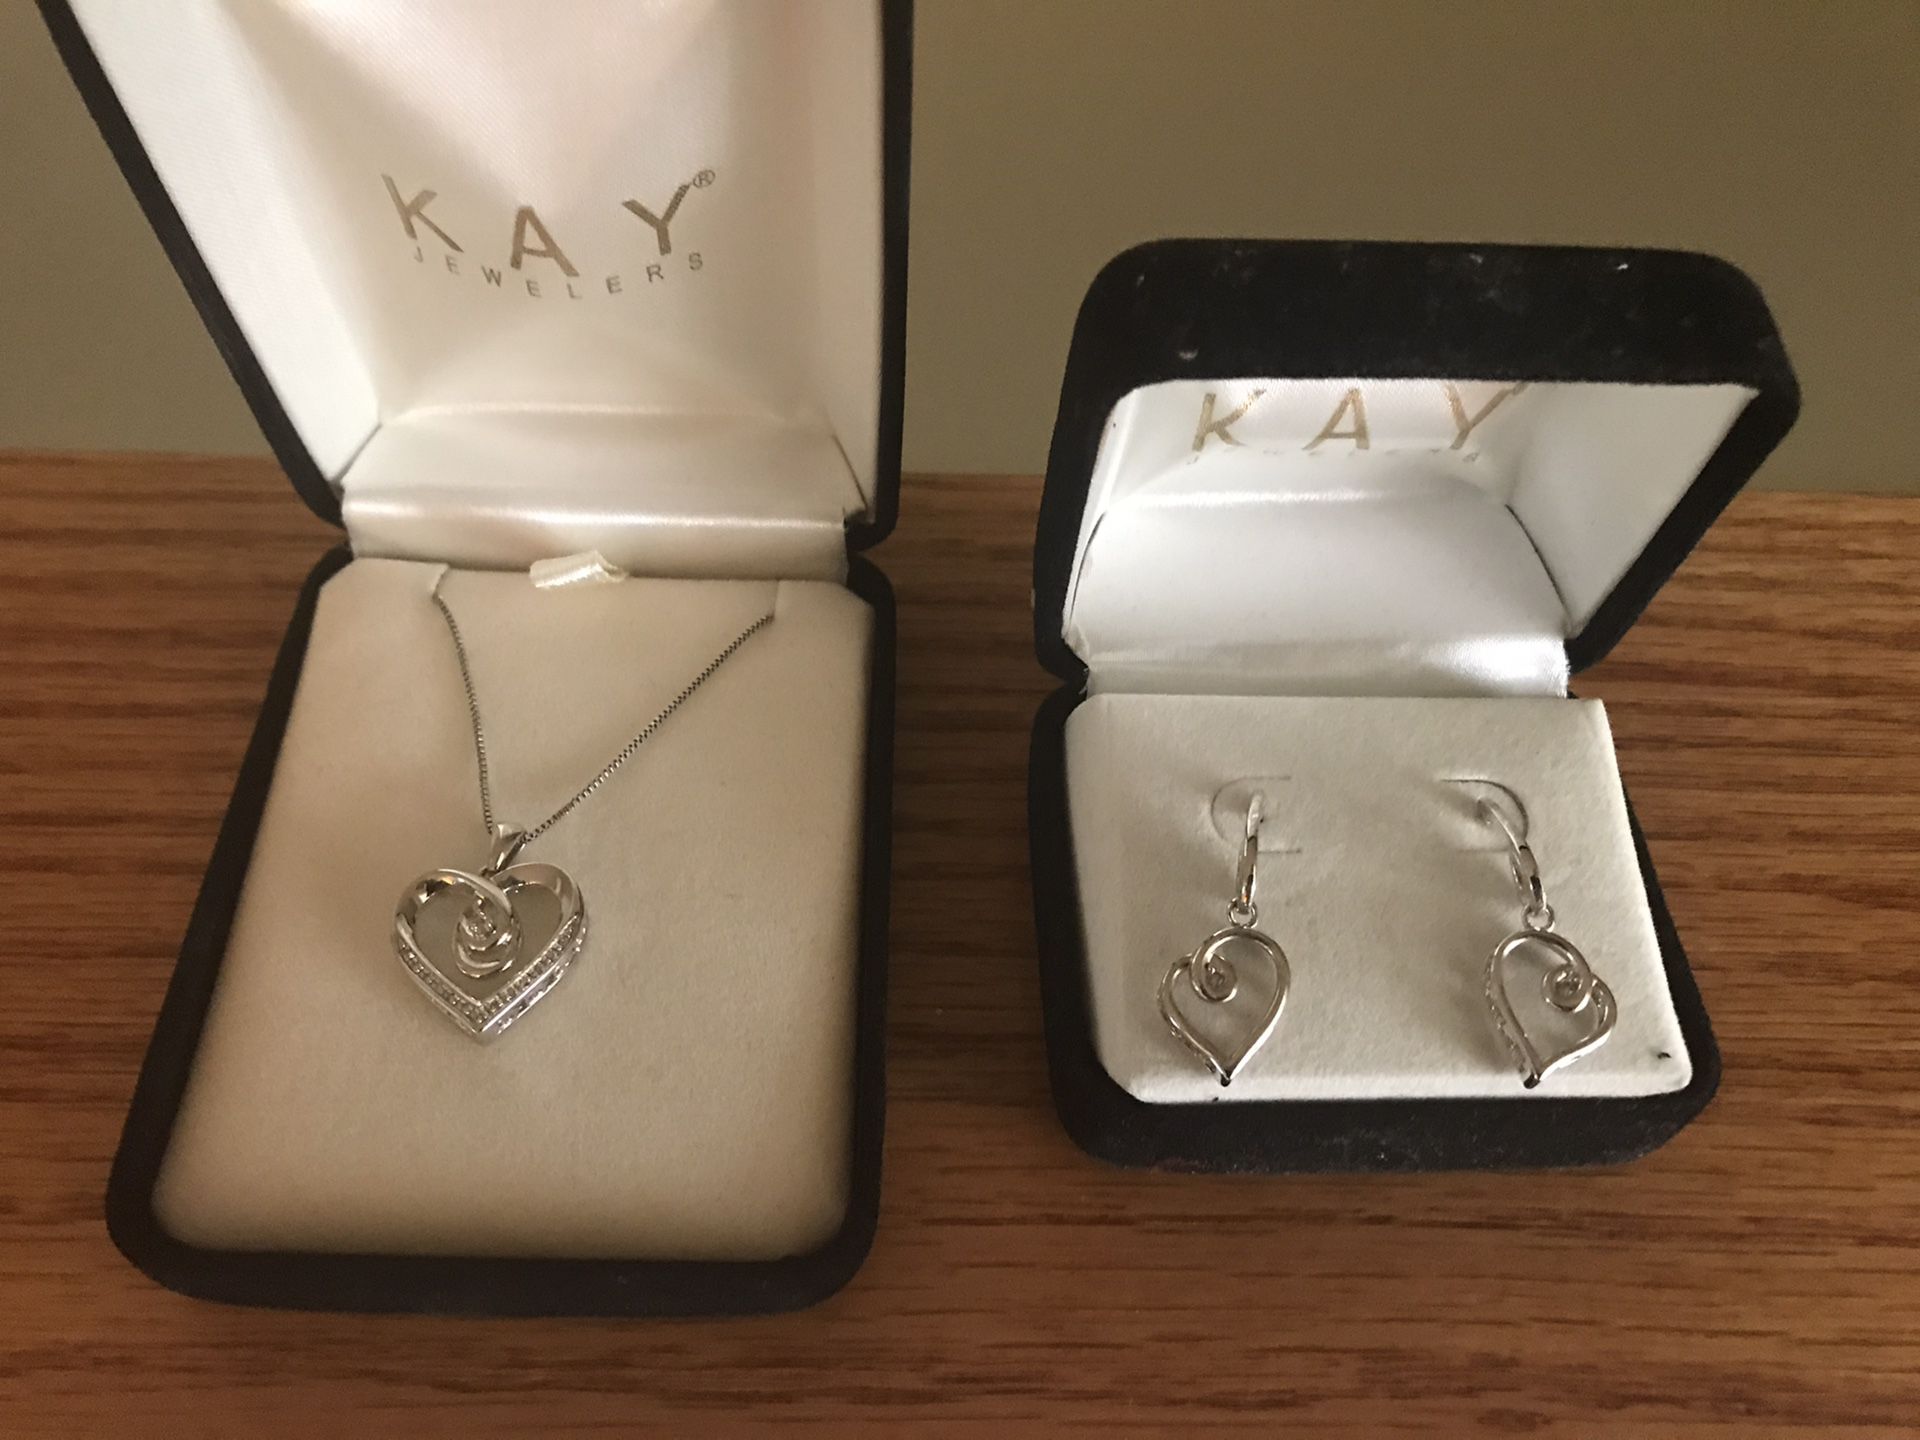 Kay Jewelry heart necklace and earrings set